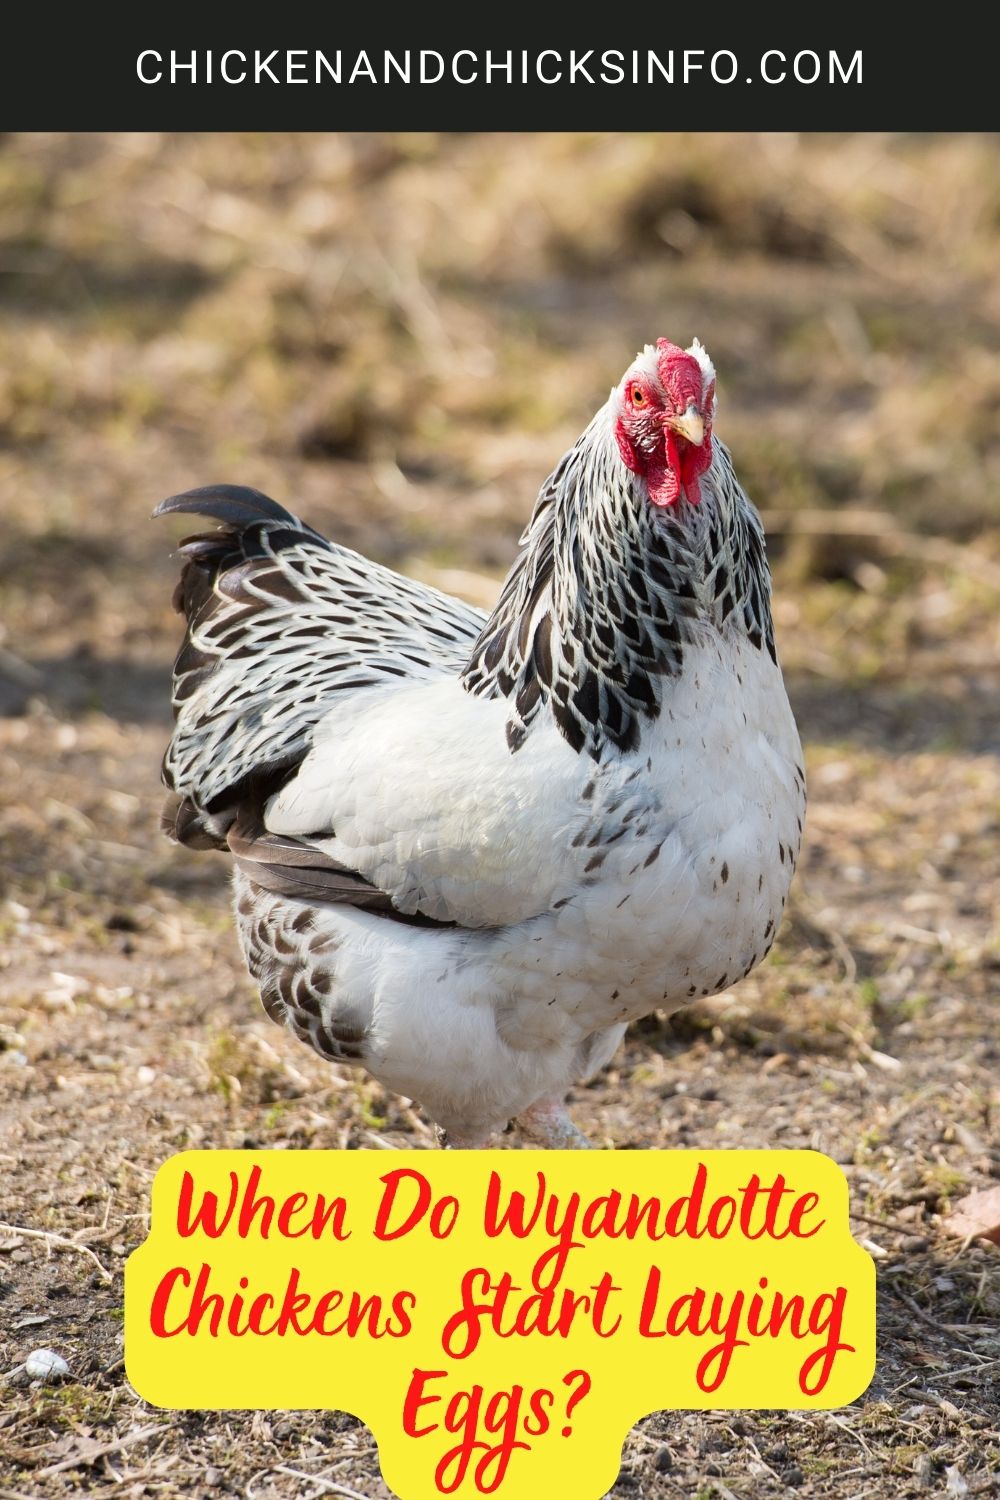 When Do Wyandotte Chickens Start Laying Eggs? poster.
